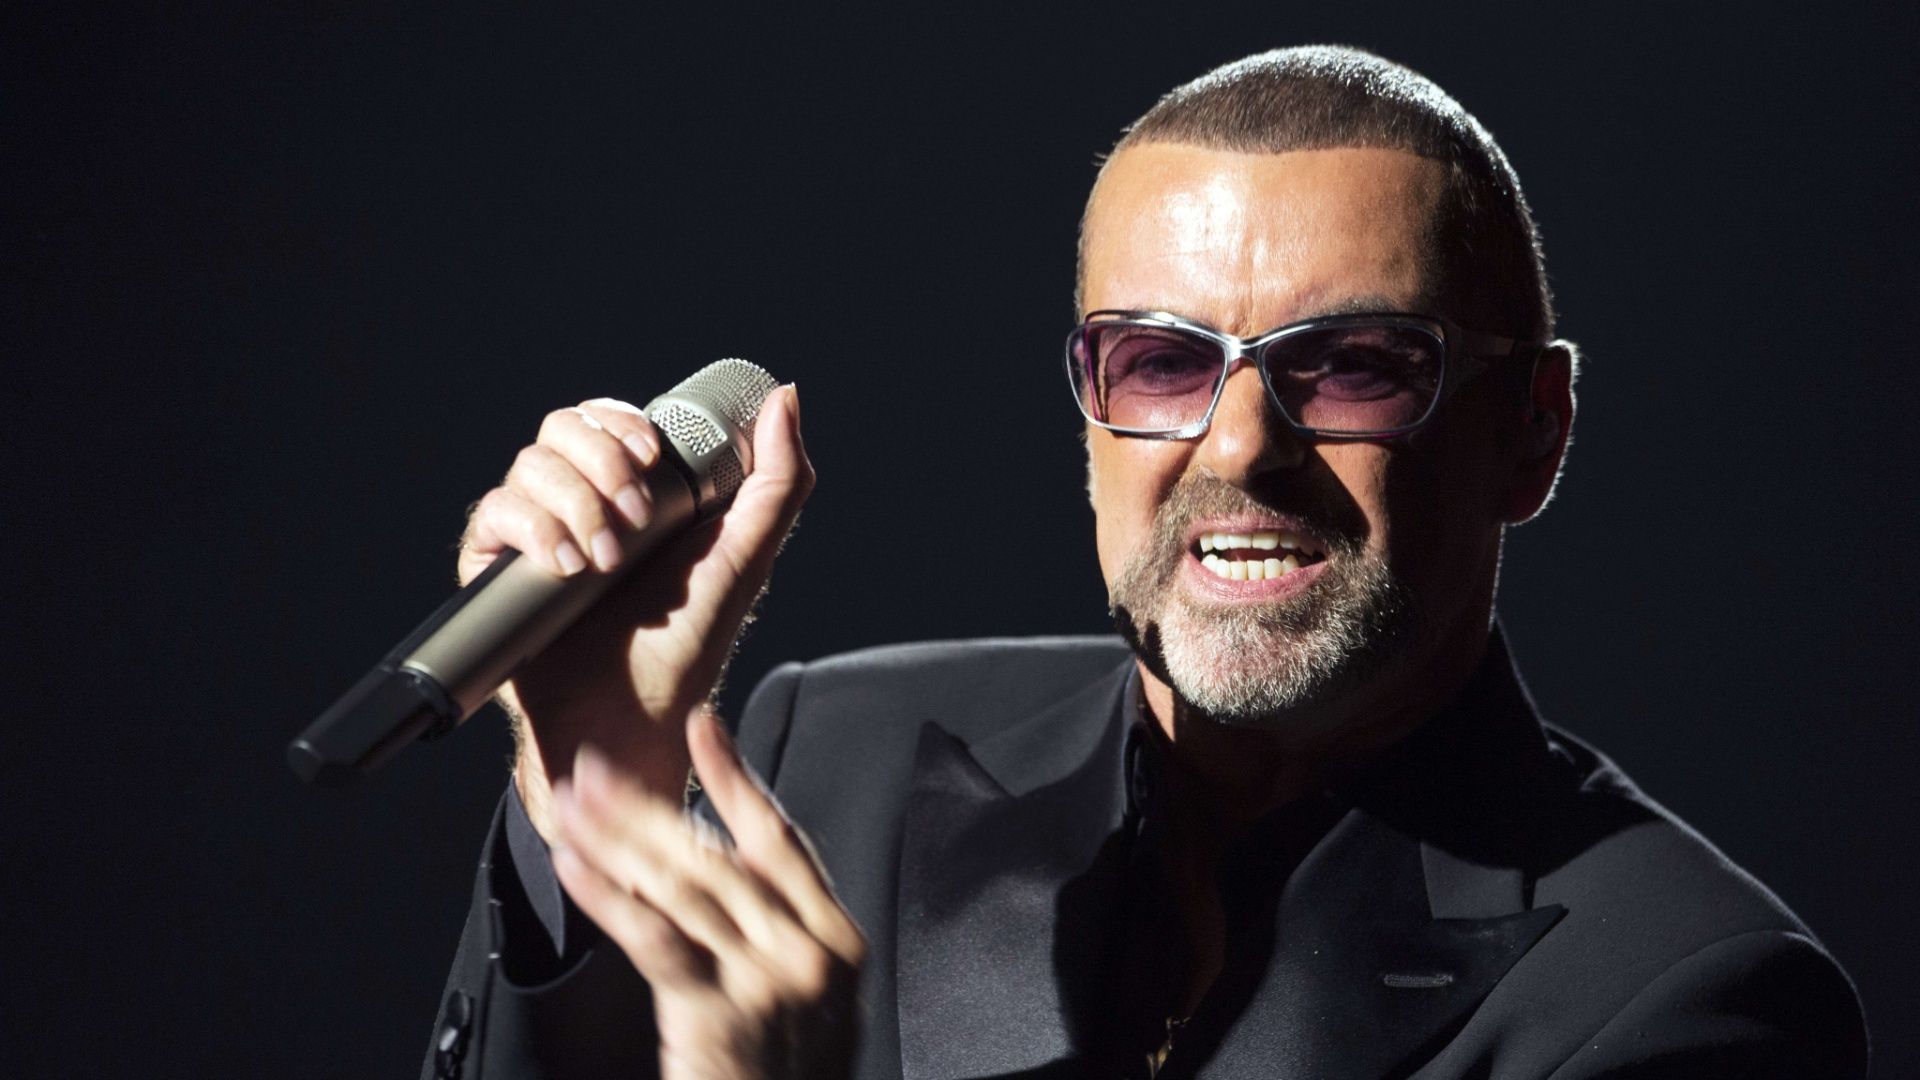 The Internet Reacted To George Michael’s Death And It Was Heartbreaking